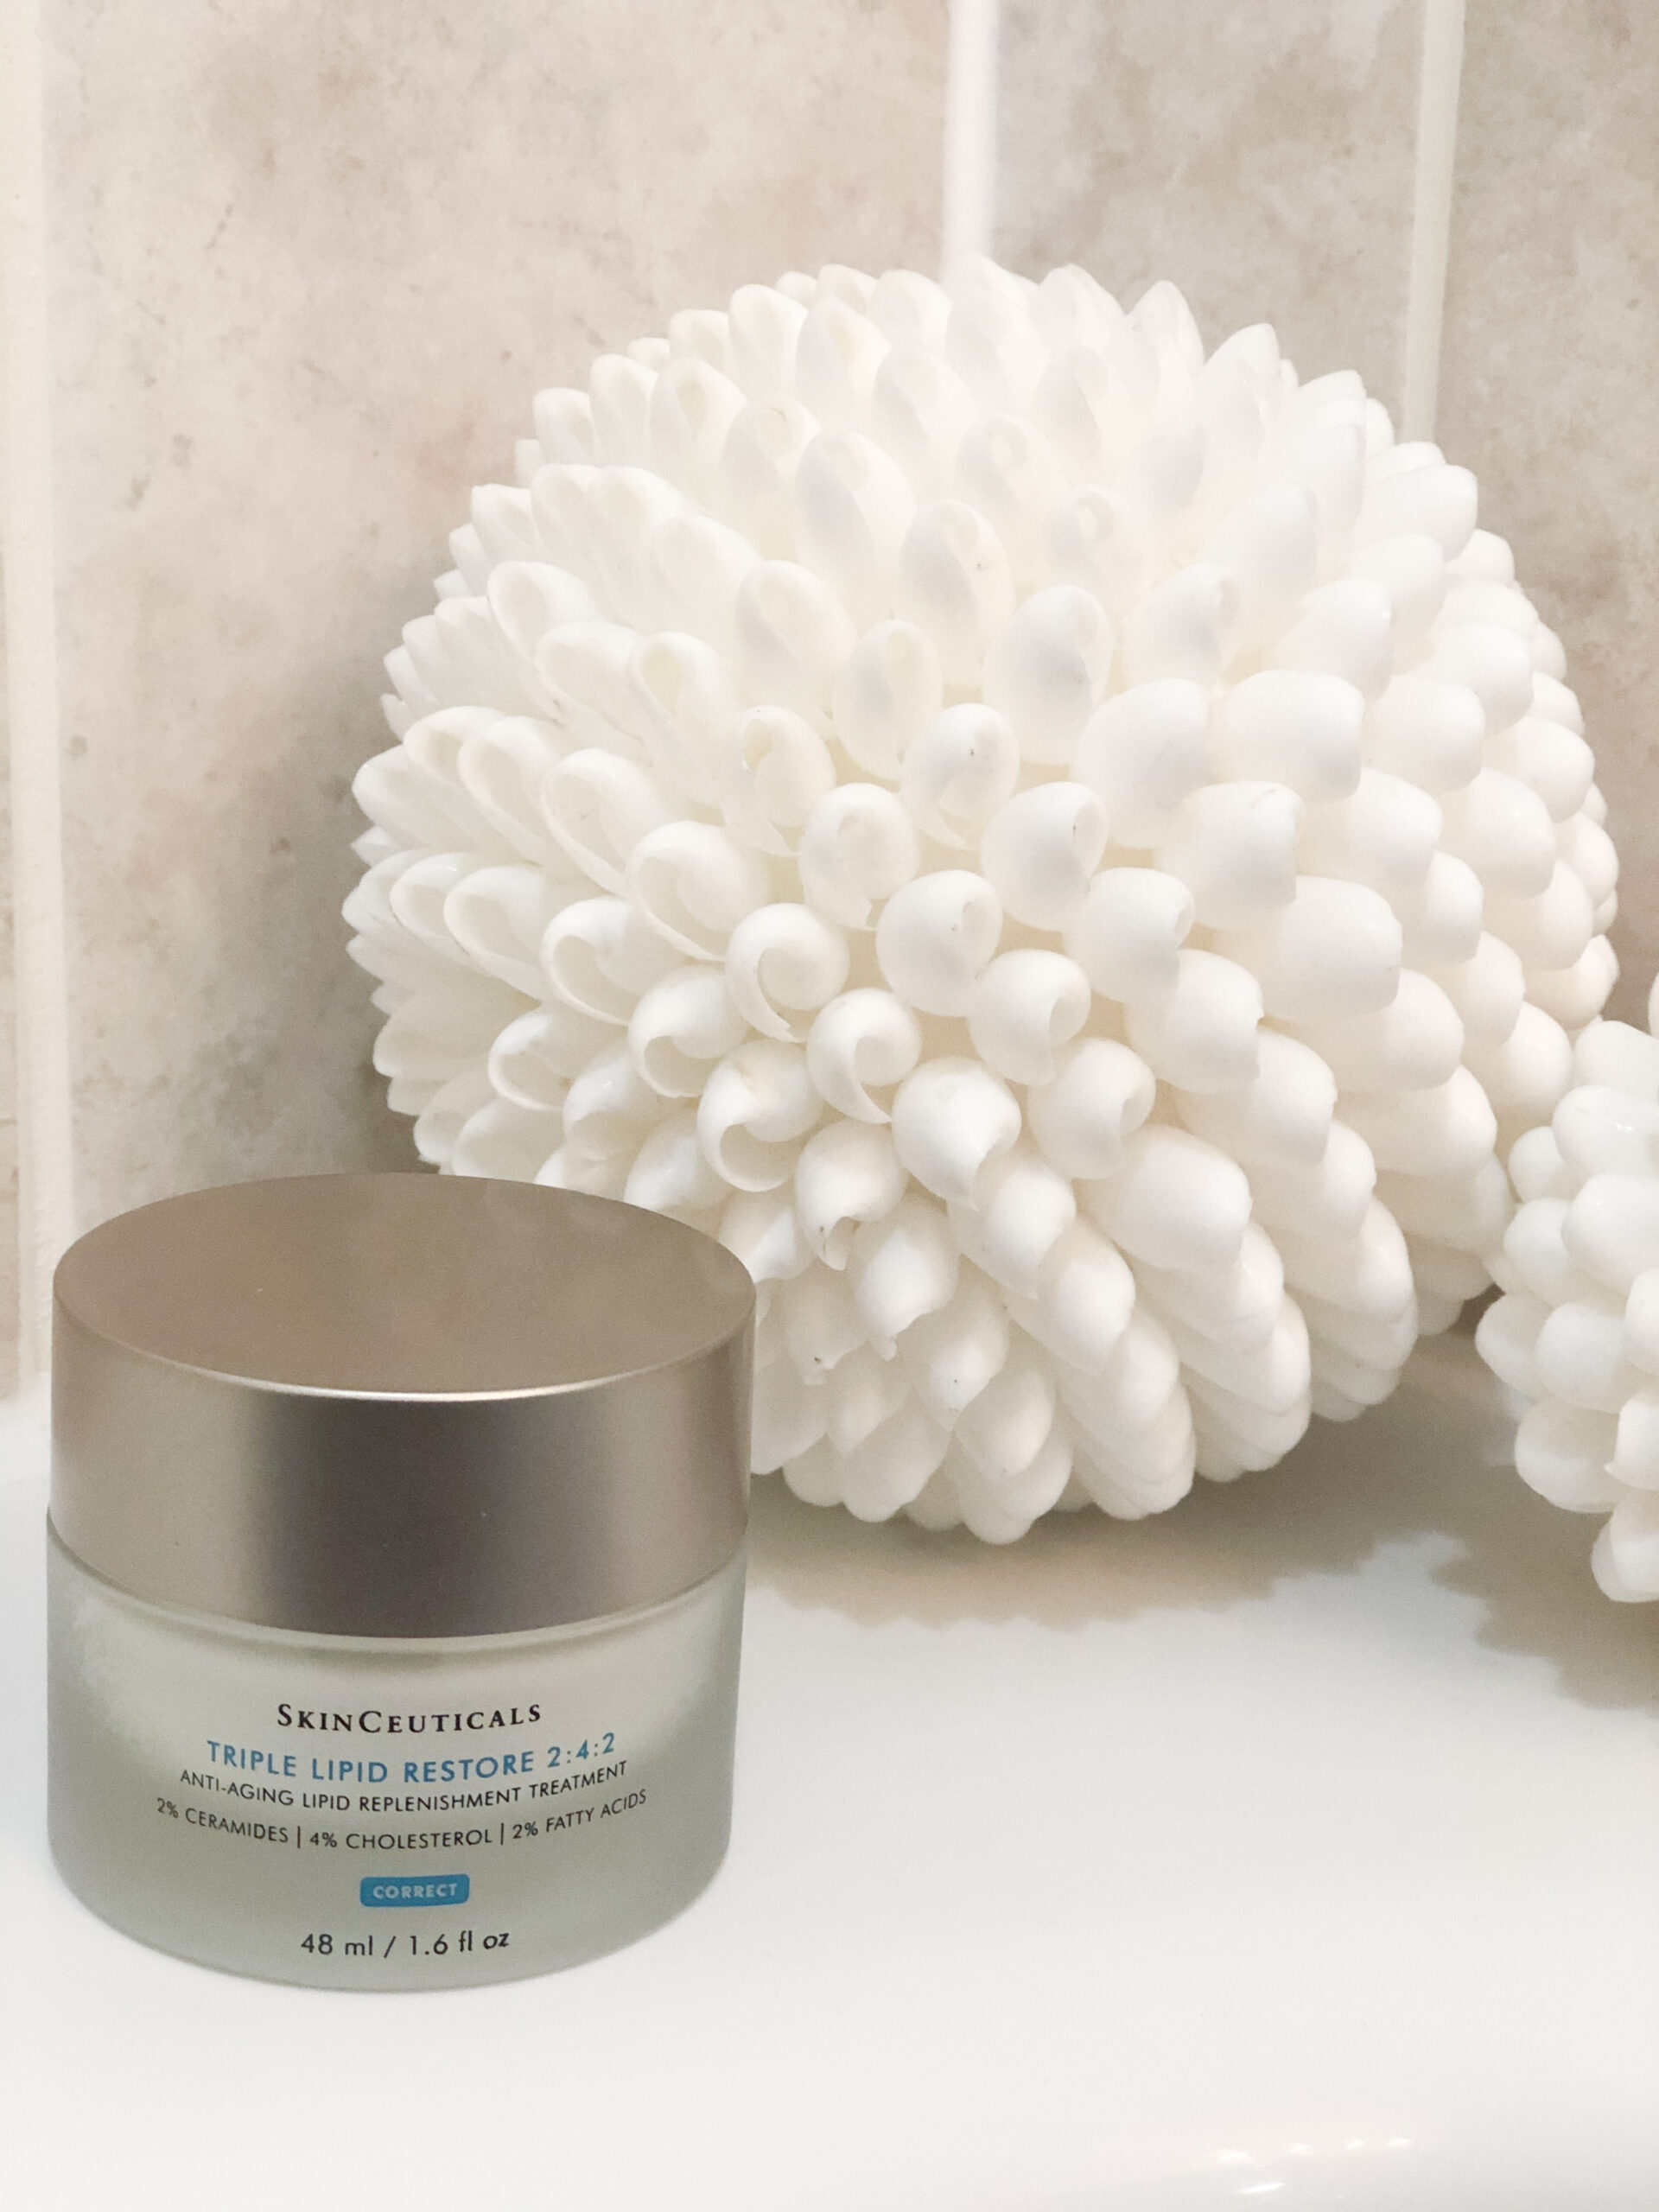 7 must have SkinCeuticals products on Livin' Life with Style 